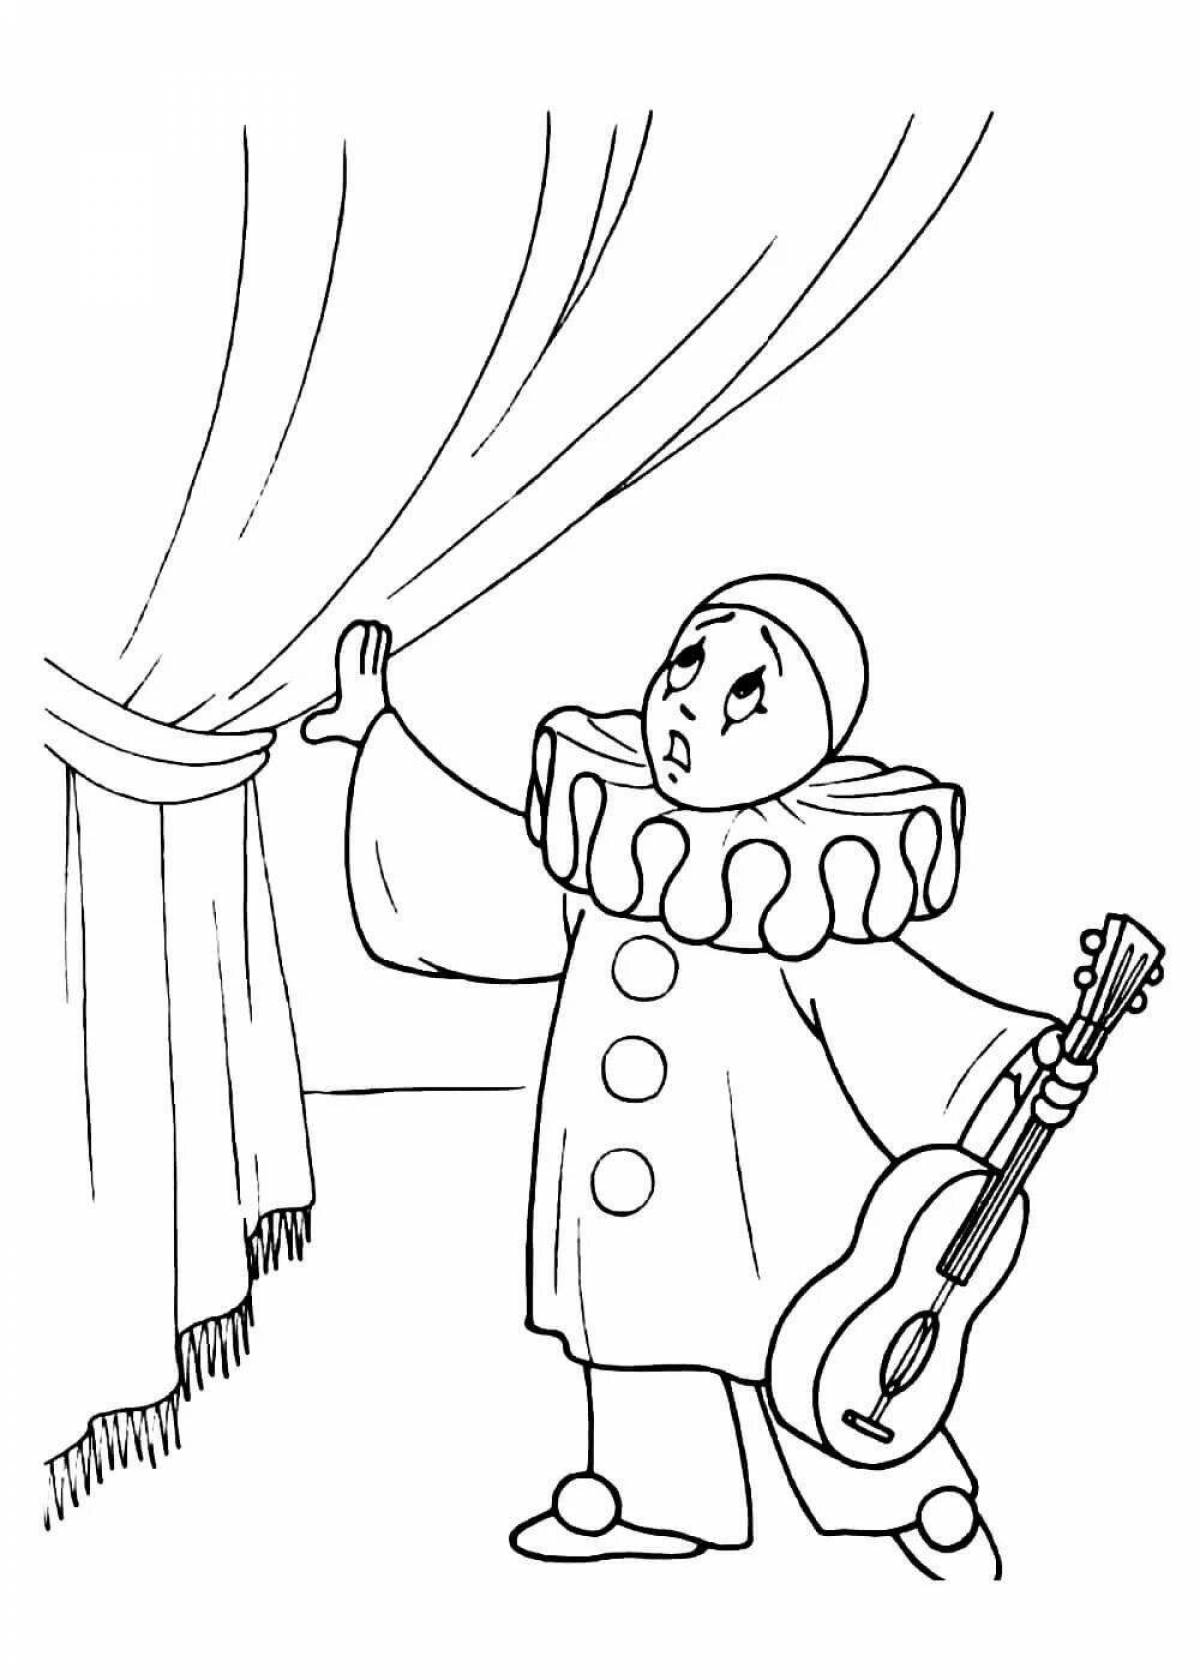 Luxury theater coloring page